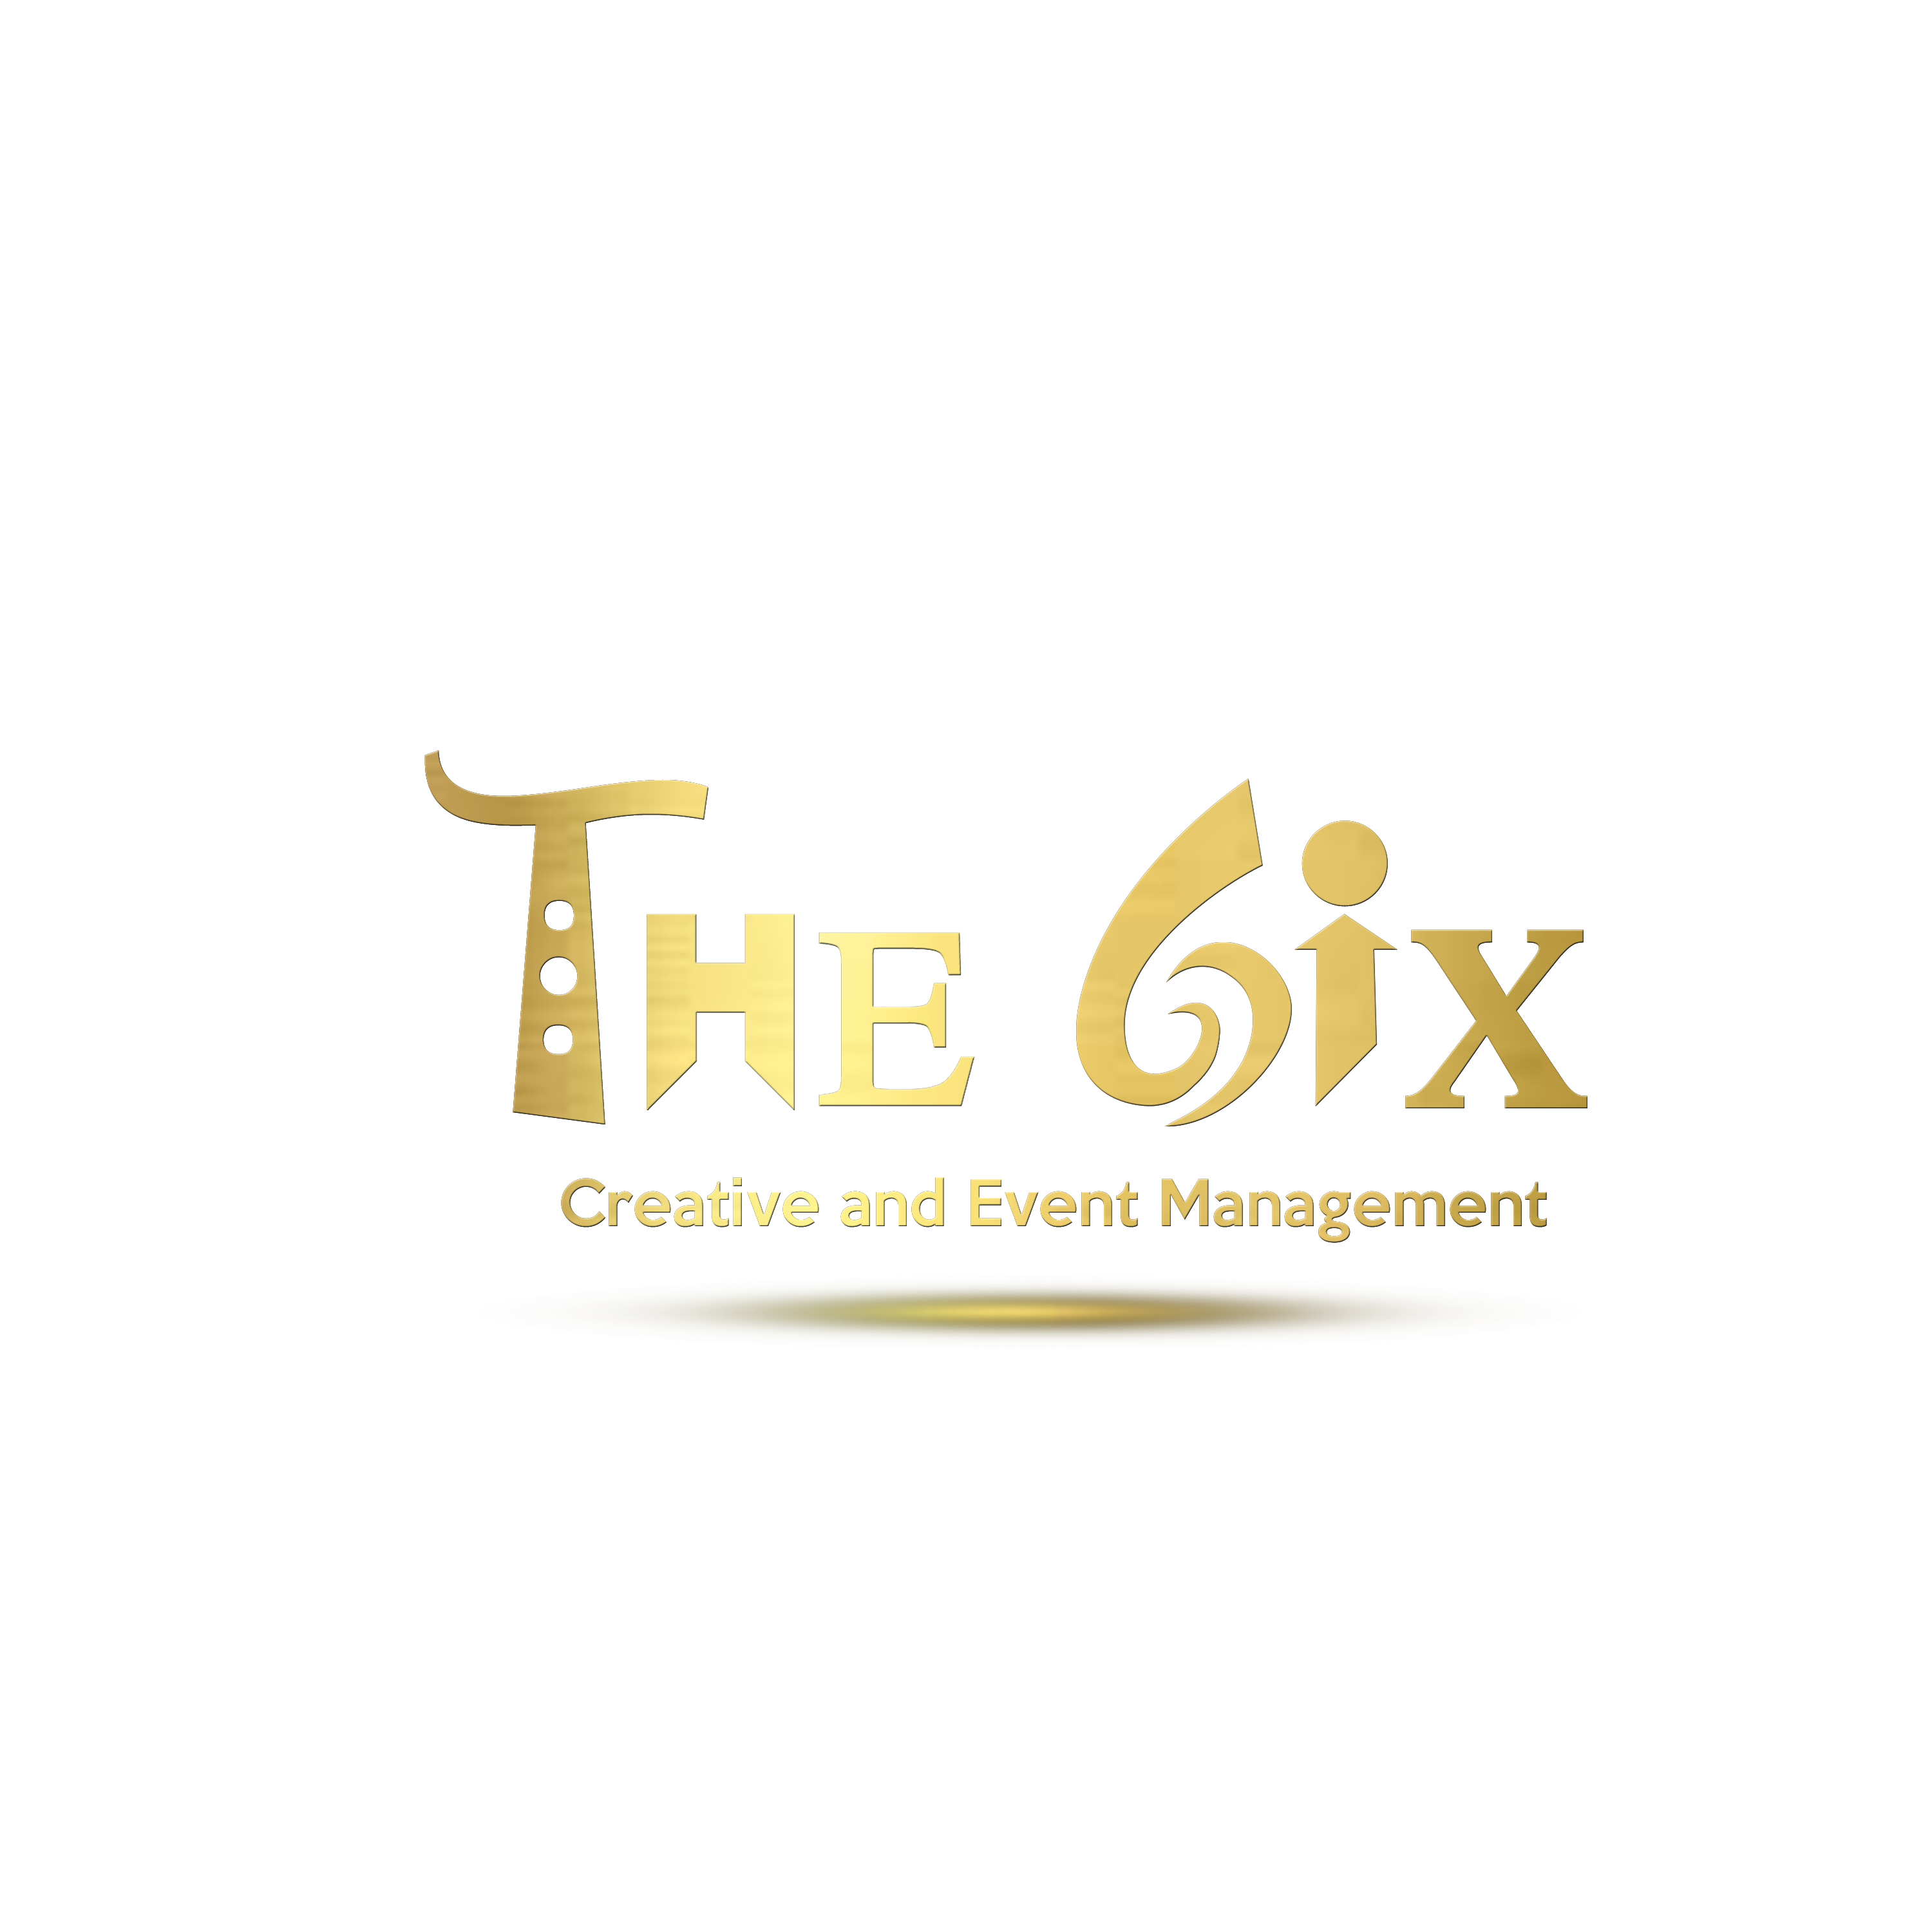 The Six Creative & Event Management